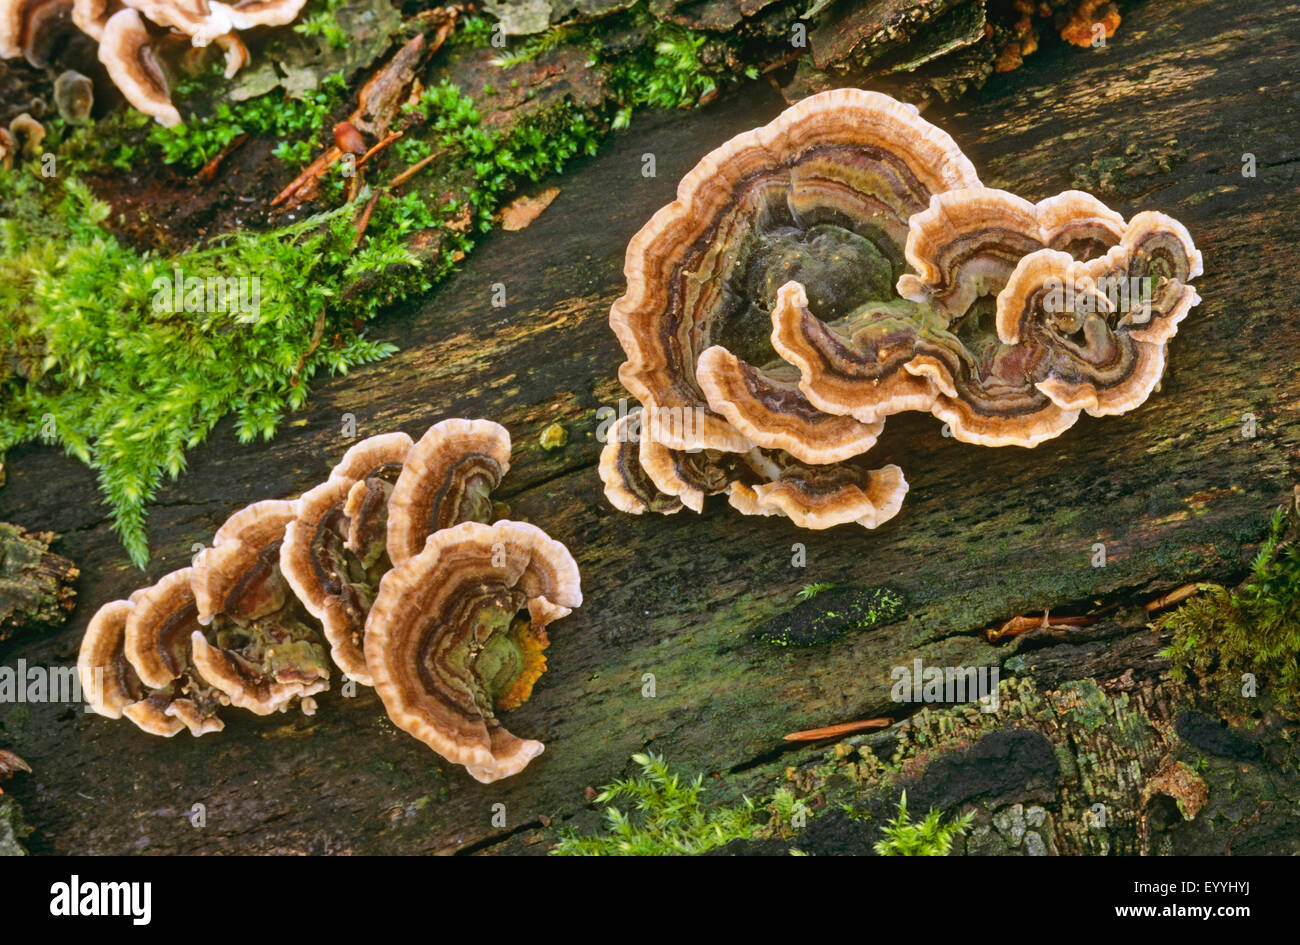 Turkey tail, Turkeytail, Many-zoned Bracket, Wood Decay (Trametes versicolor, Coriolus versicolor), fruiting bodies on deadwood, Germany Stock Photo